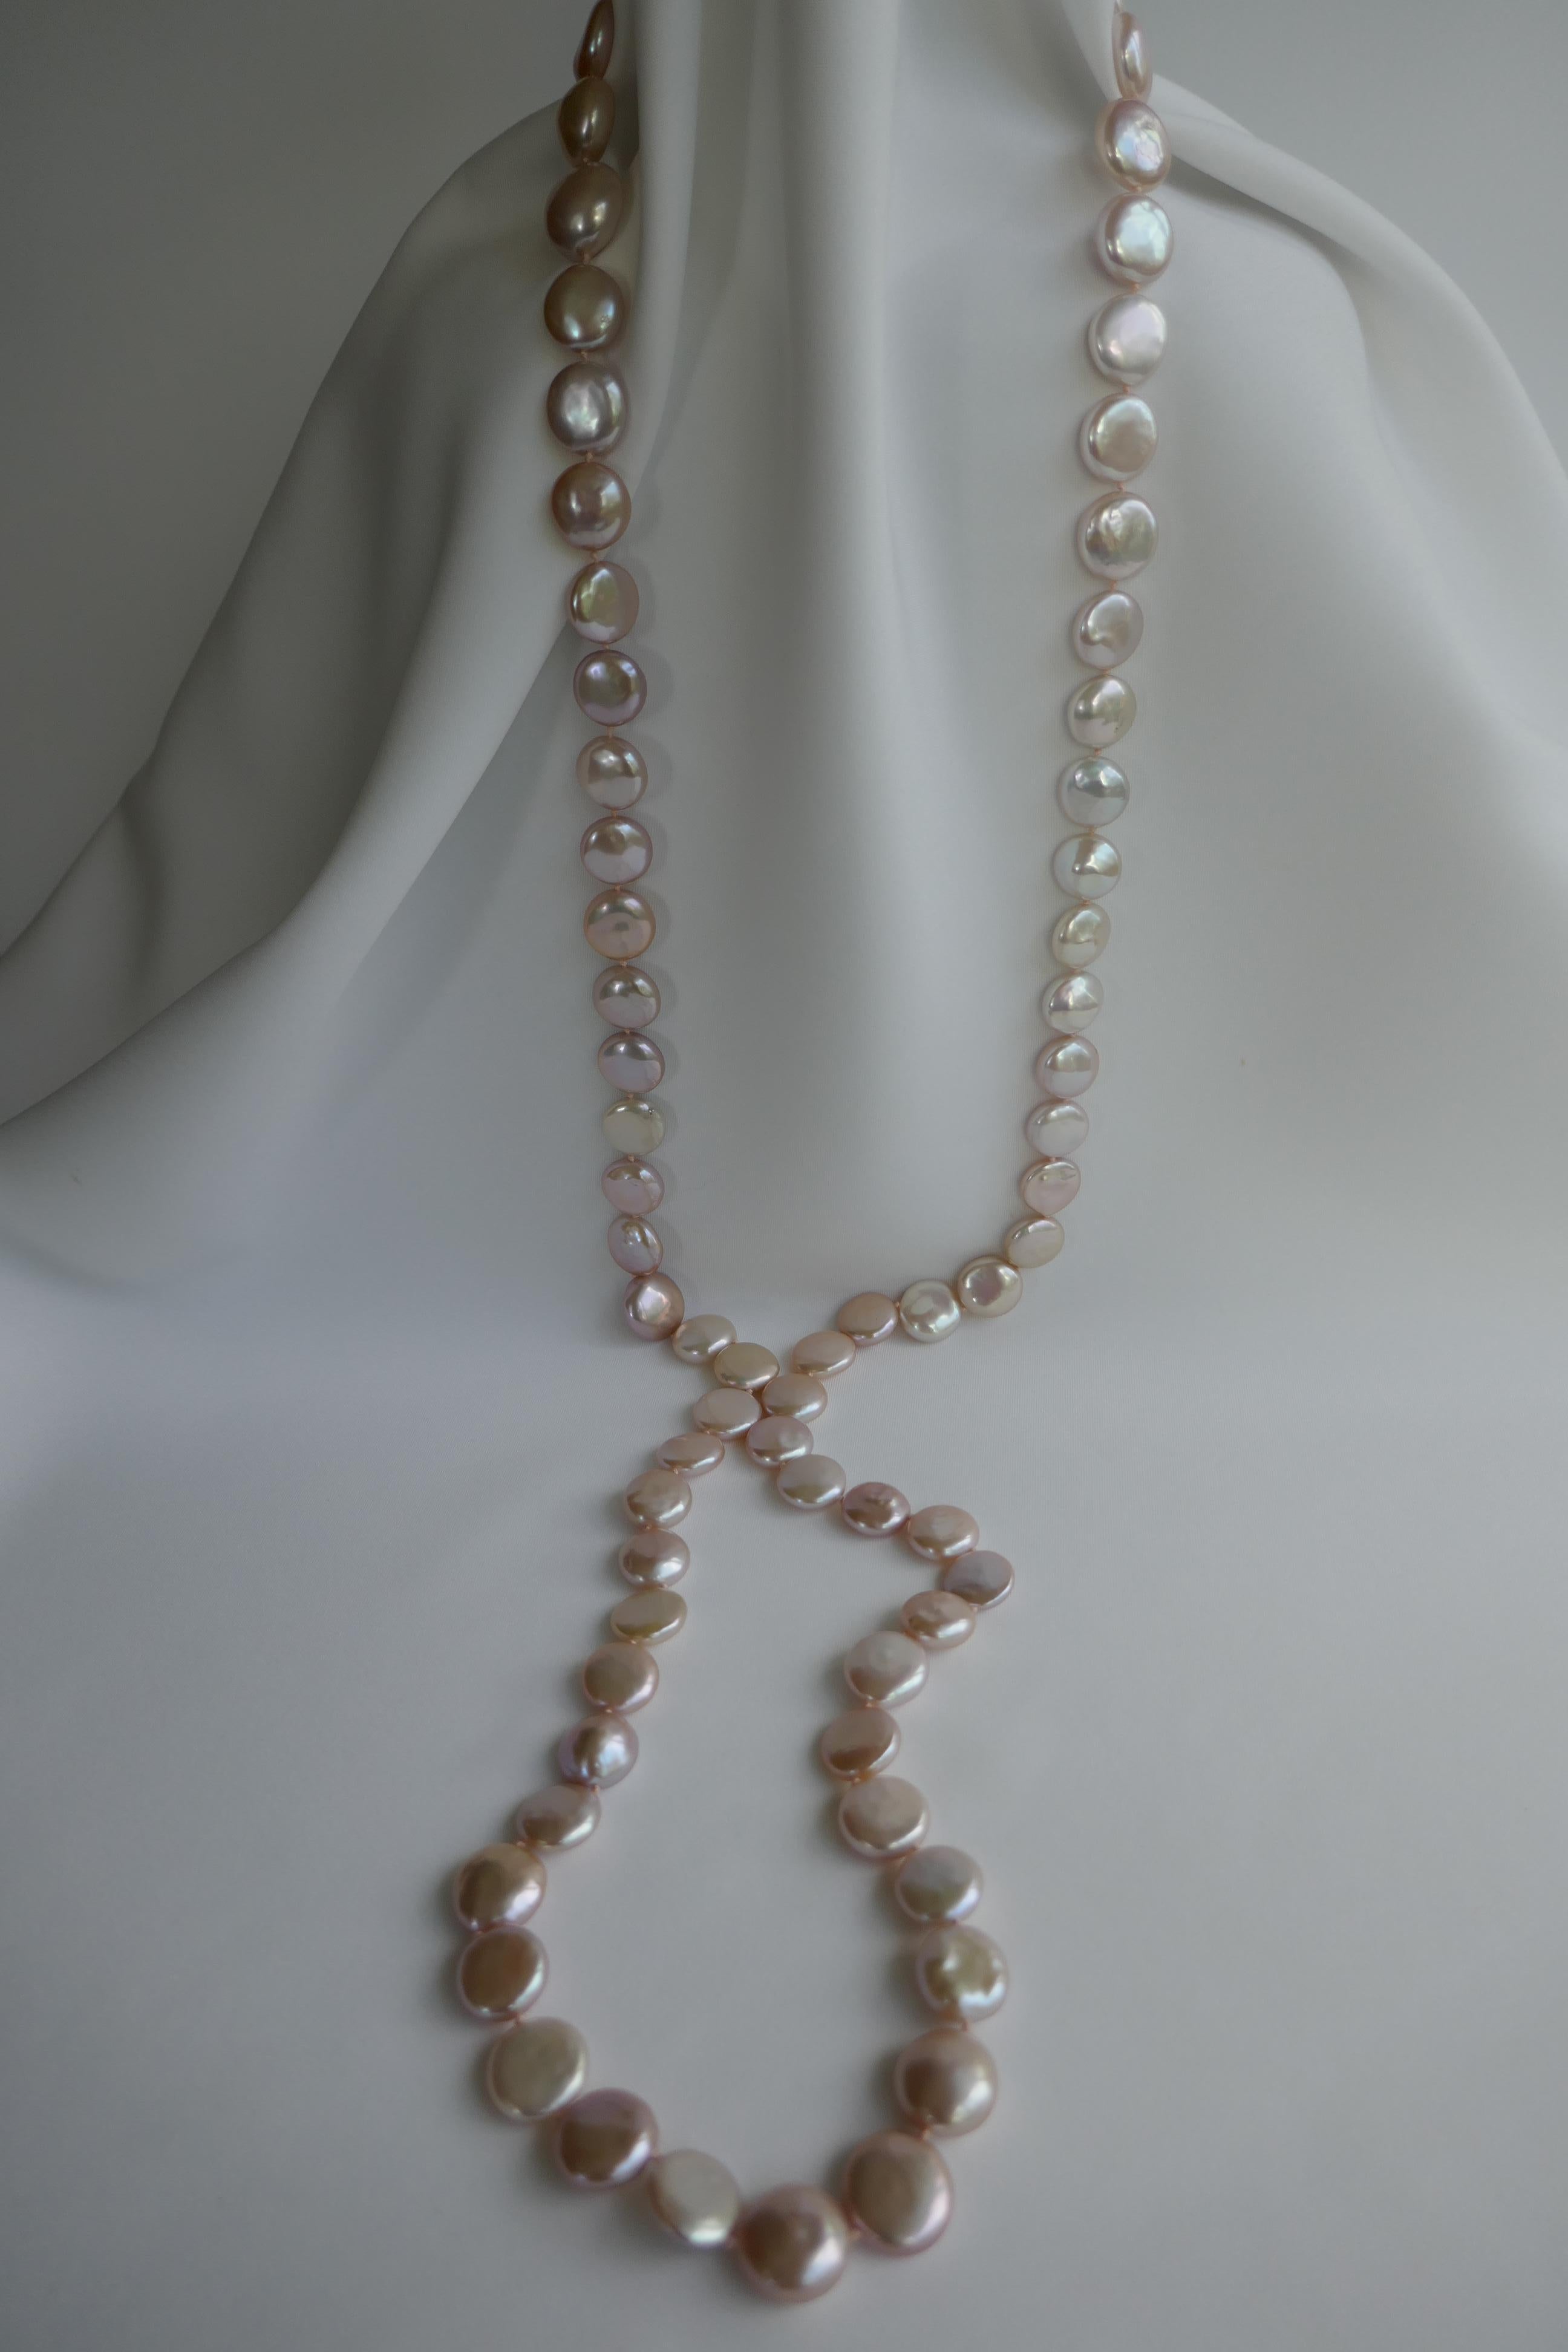 Natural Tones Keshi Cultured Pearls Rock Crystal 925 Sterling Silver Necklace In New Condition For Sale In Coral Gables, FL